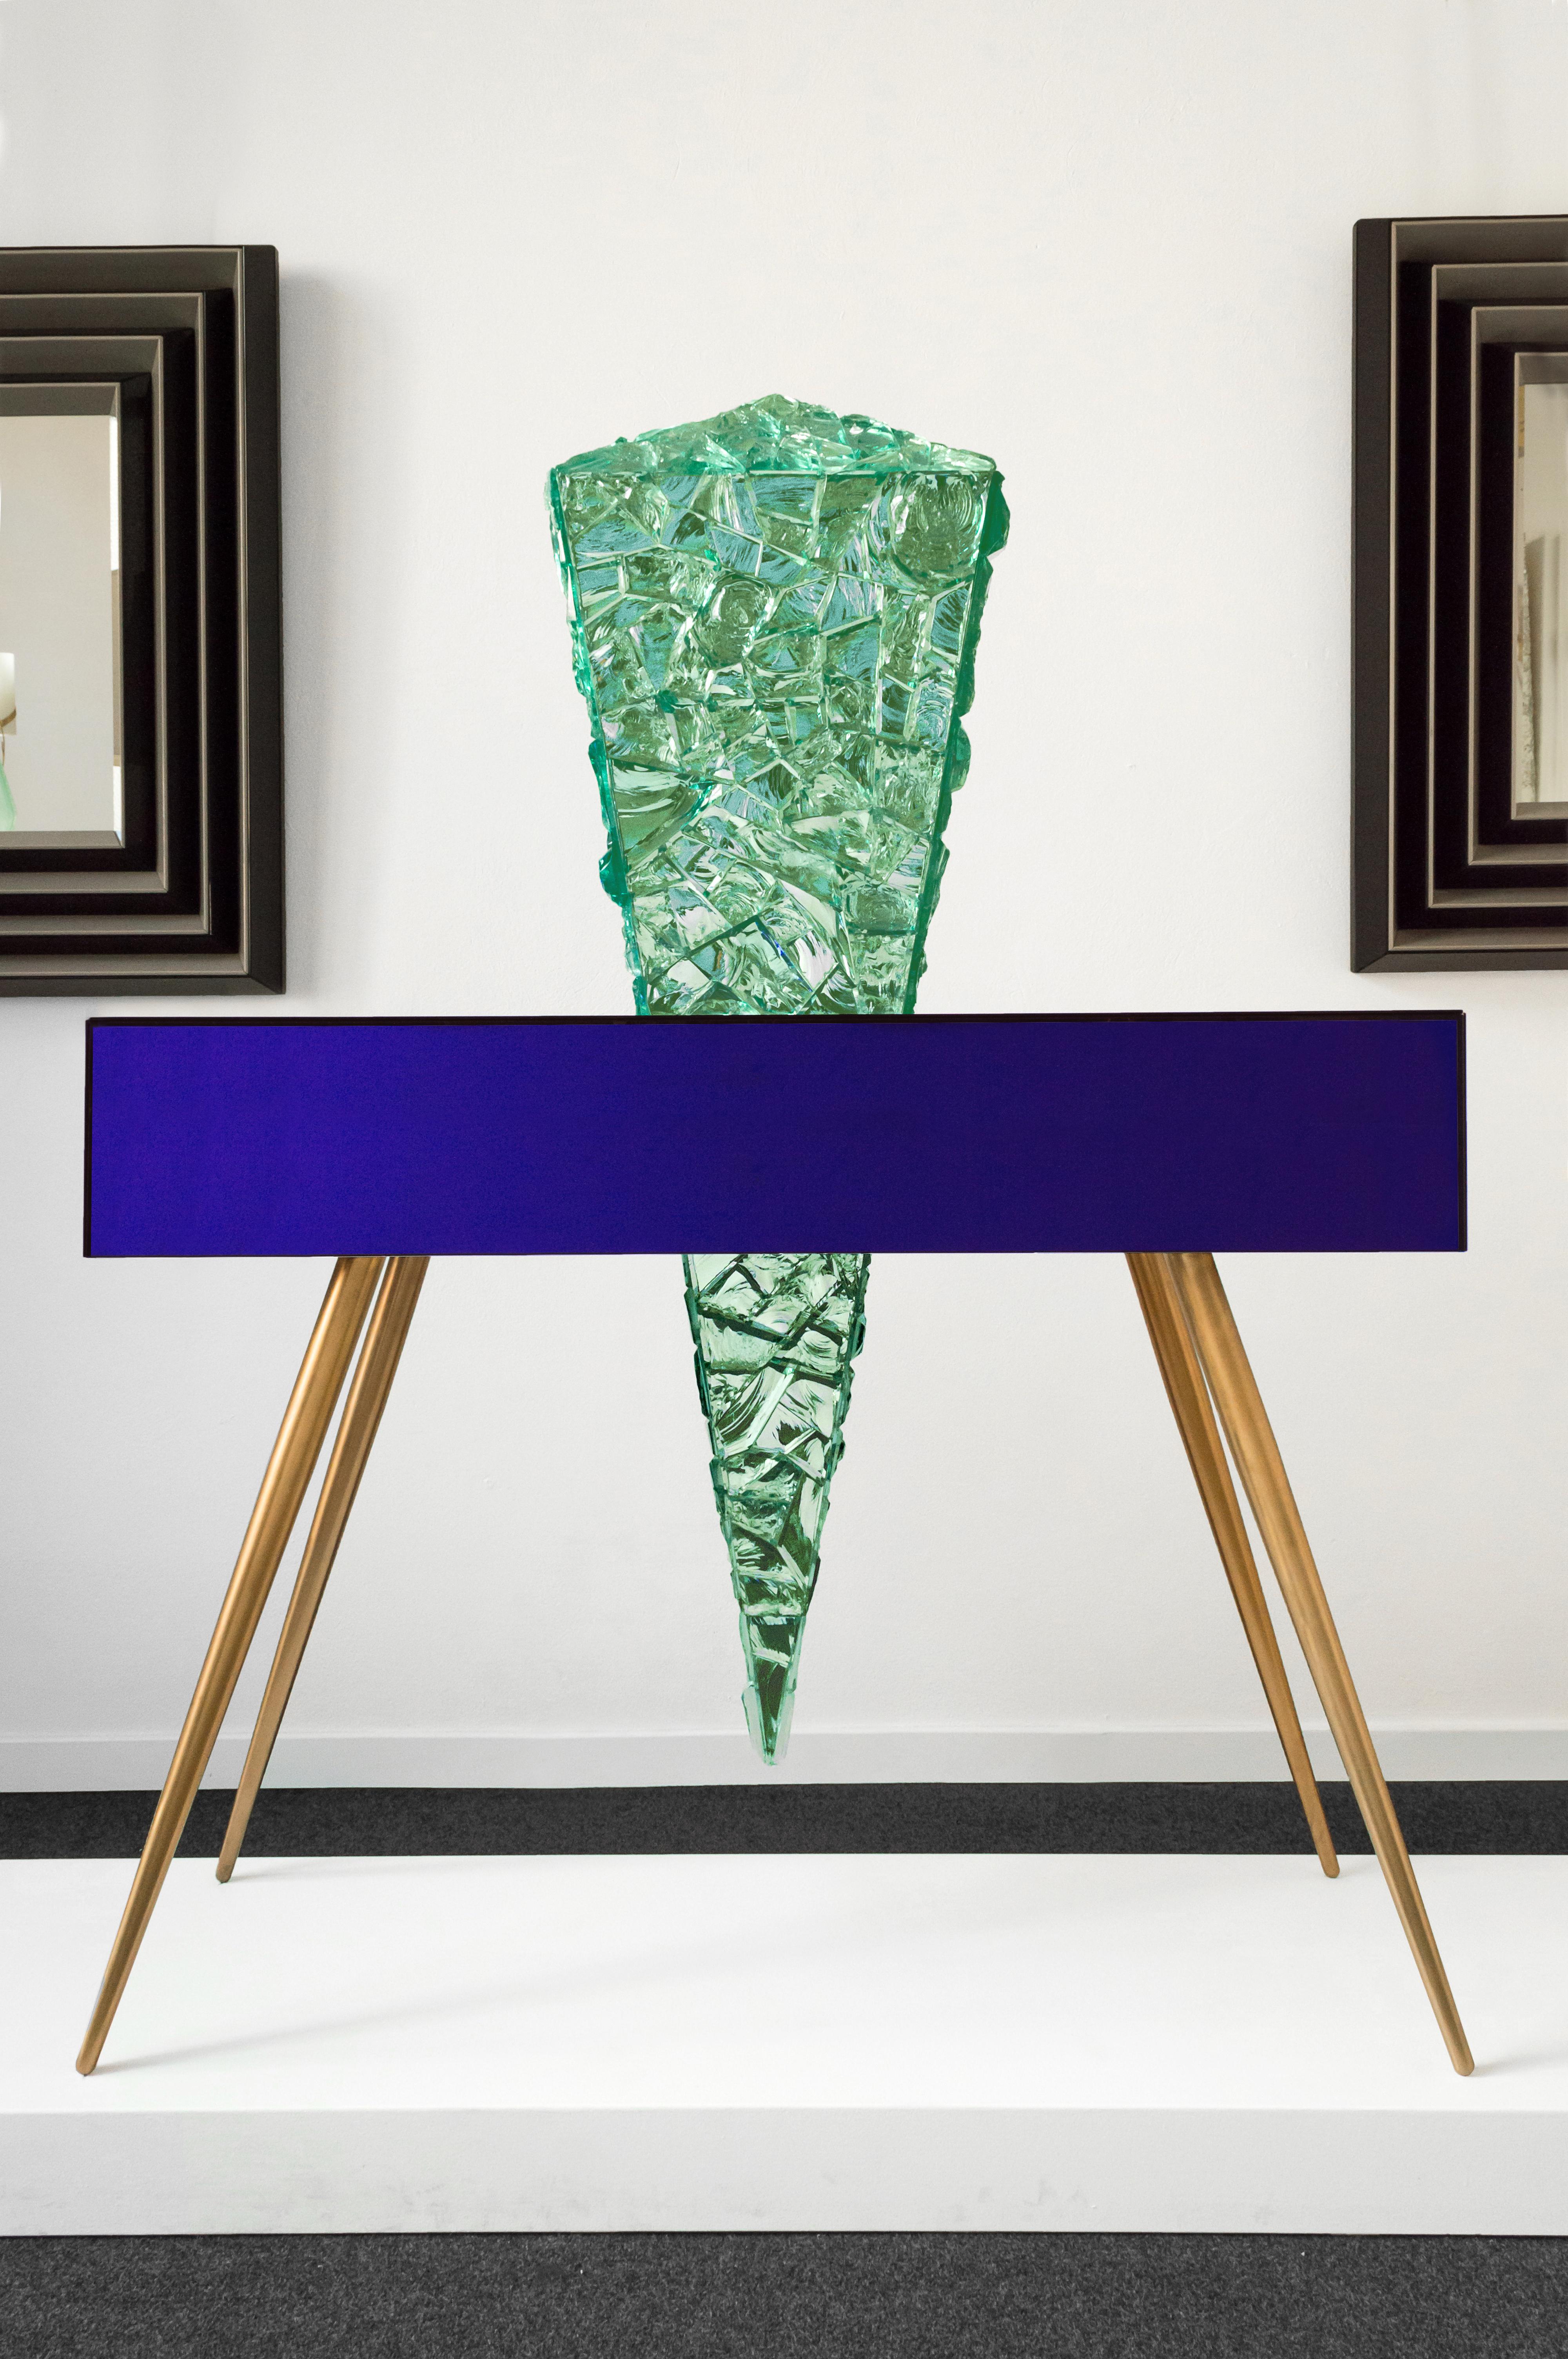 Console THE COLLECTOR by Roberto Giulio Rida

Unique and nonreplicable specimen made entirely by hand in Italy with vintage blue glass and hand-ground and shaped crystal.

This particular sculptural work by Roberto Giulio Rida is a magnificent